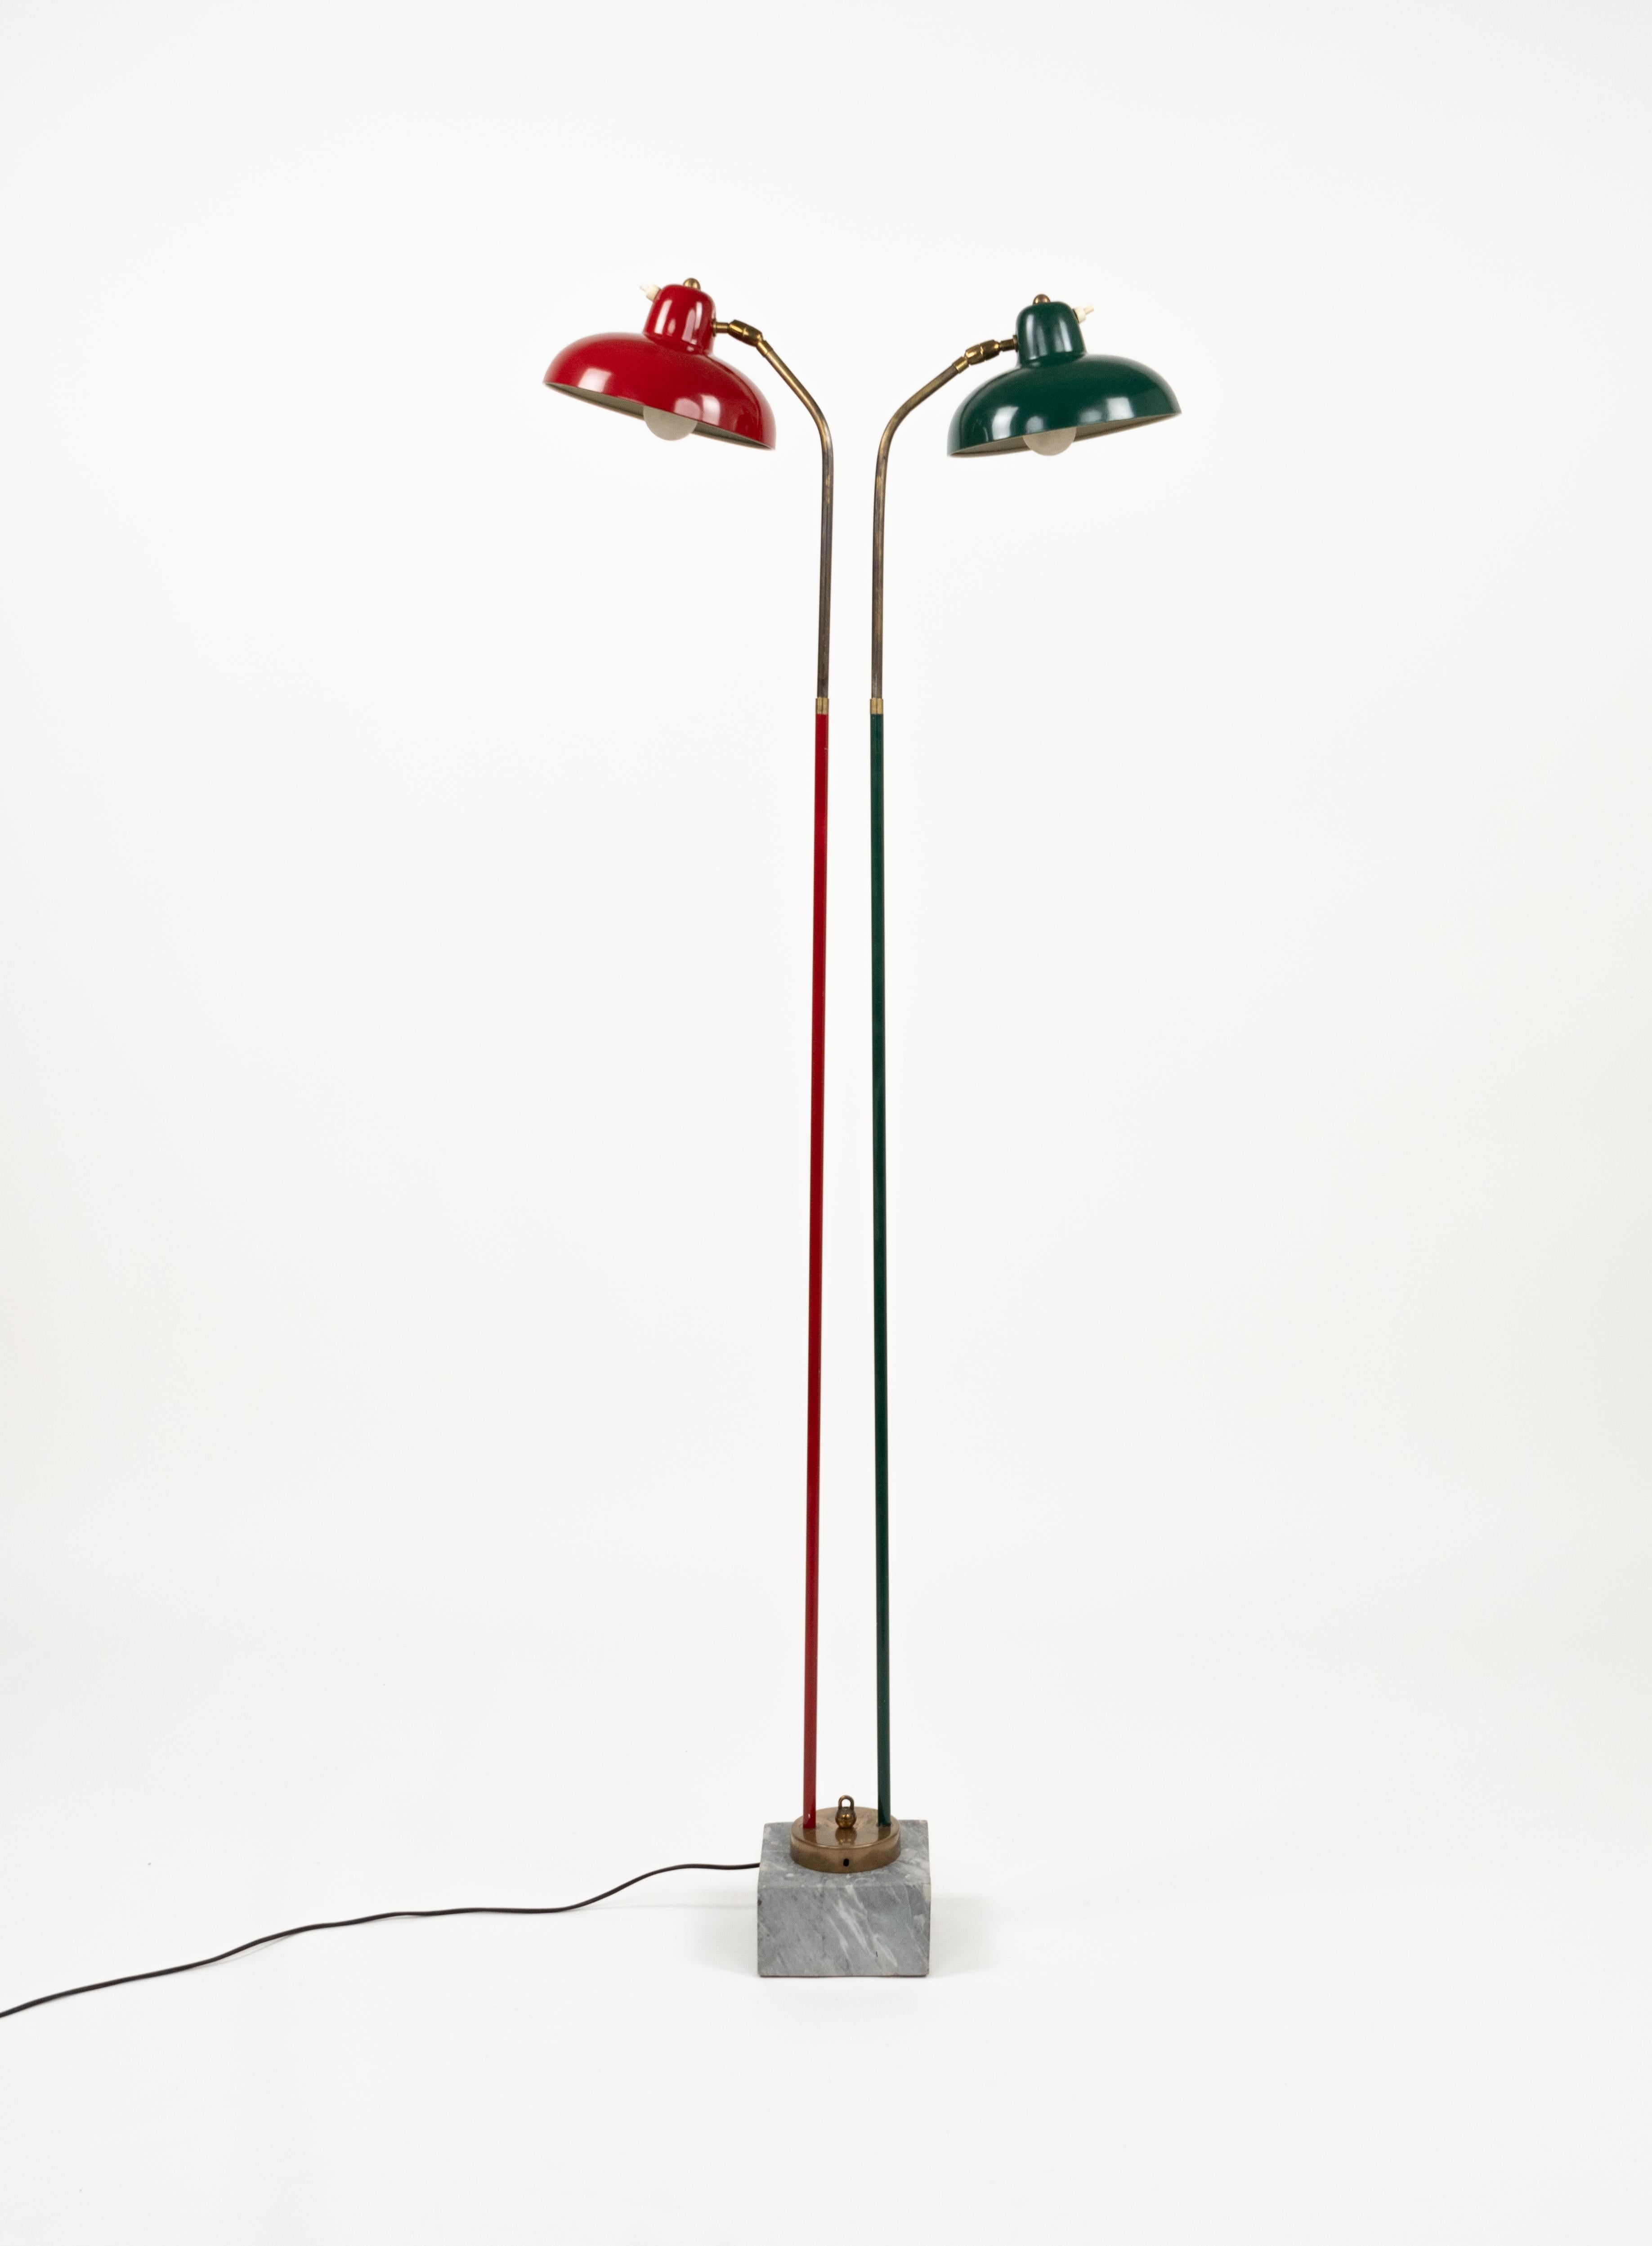 Midcentury amazing adjustable two arm floor lamp in lacquered metal ( green and red), brass and marble in the style of Stilnovo.

Made in Italy in the 1950s.